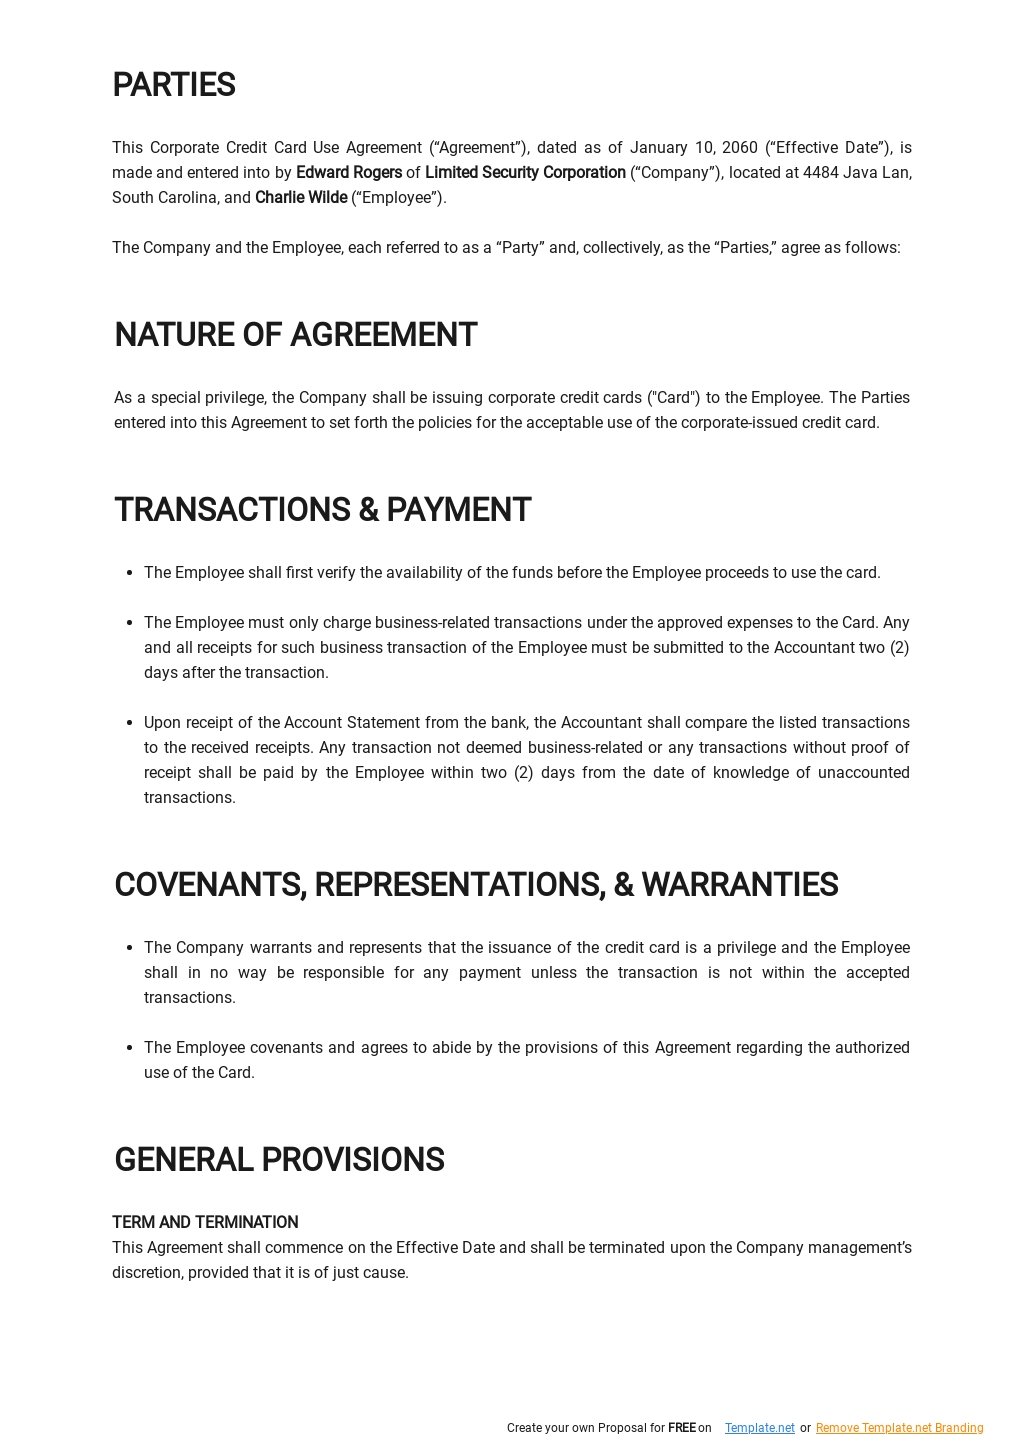 Corporate Credit Card Use Agreement Template  Google Docs, Word With Corporate Credit Card Agreement Template